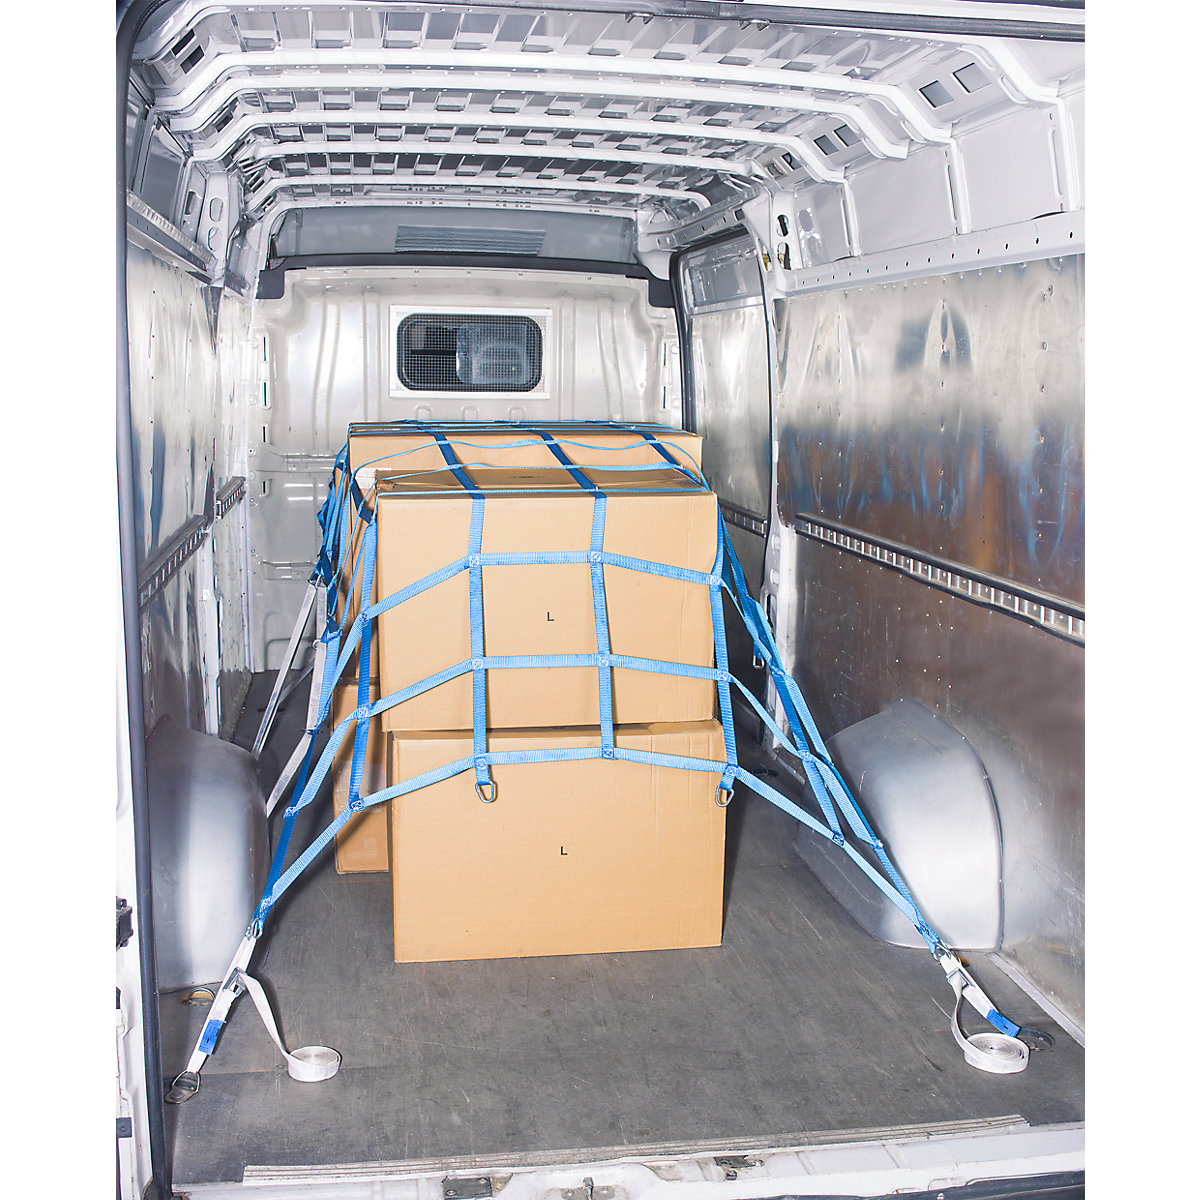 Load securing net: for small van